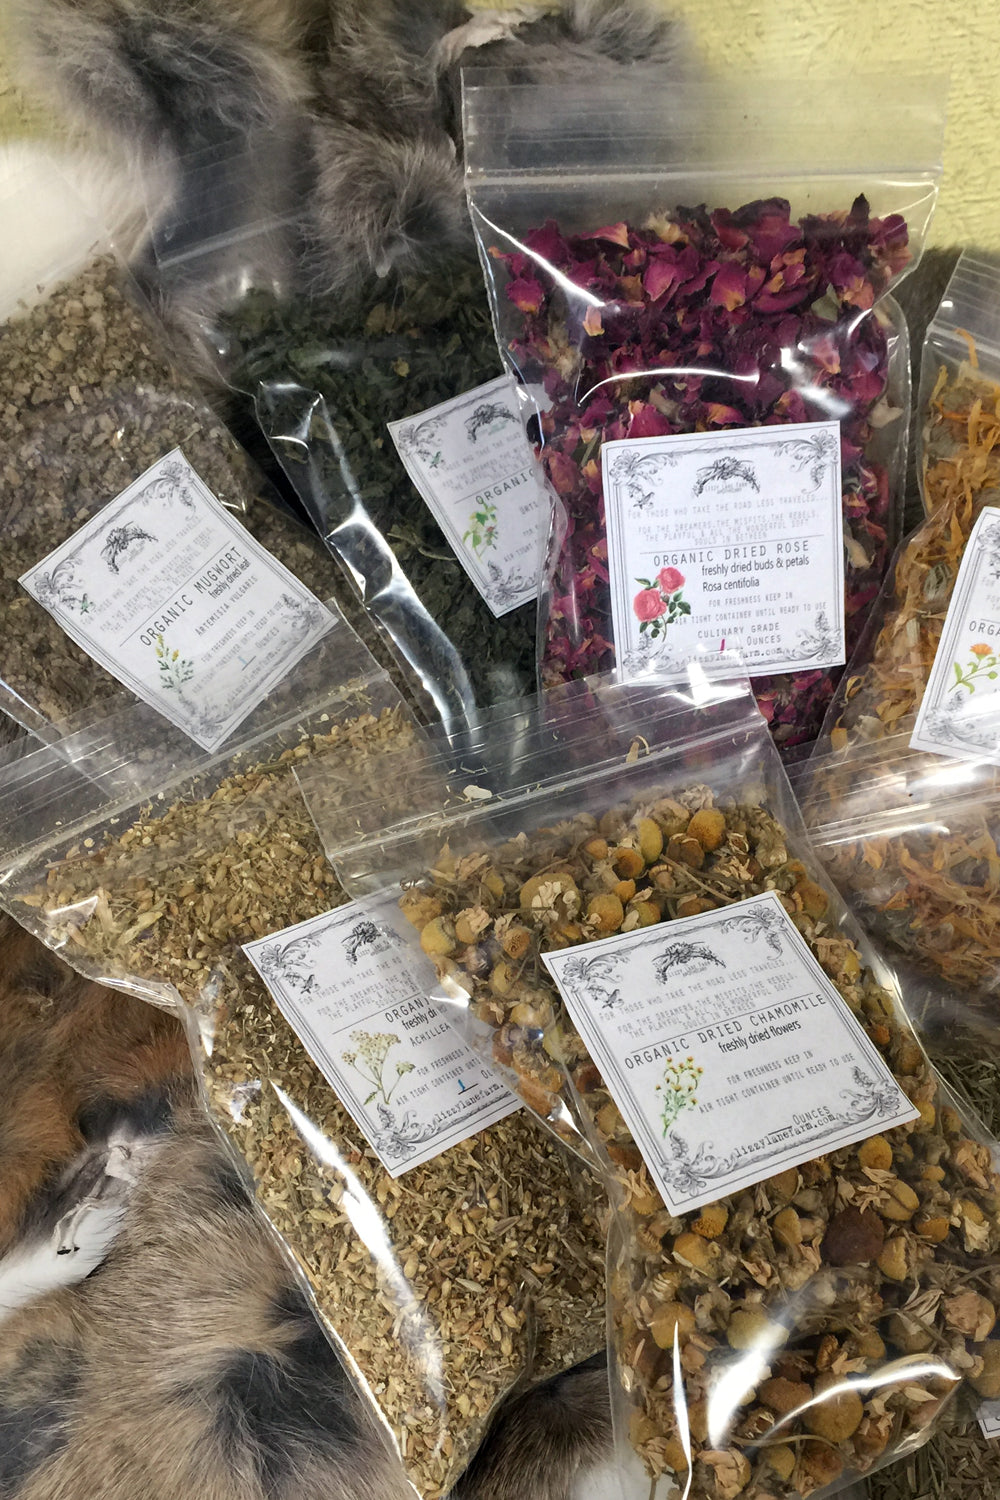 Dried Rose FAQ {How to store and use fresh dried roses} – Lizzy Lane Farm  Apothecary